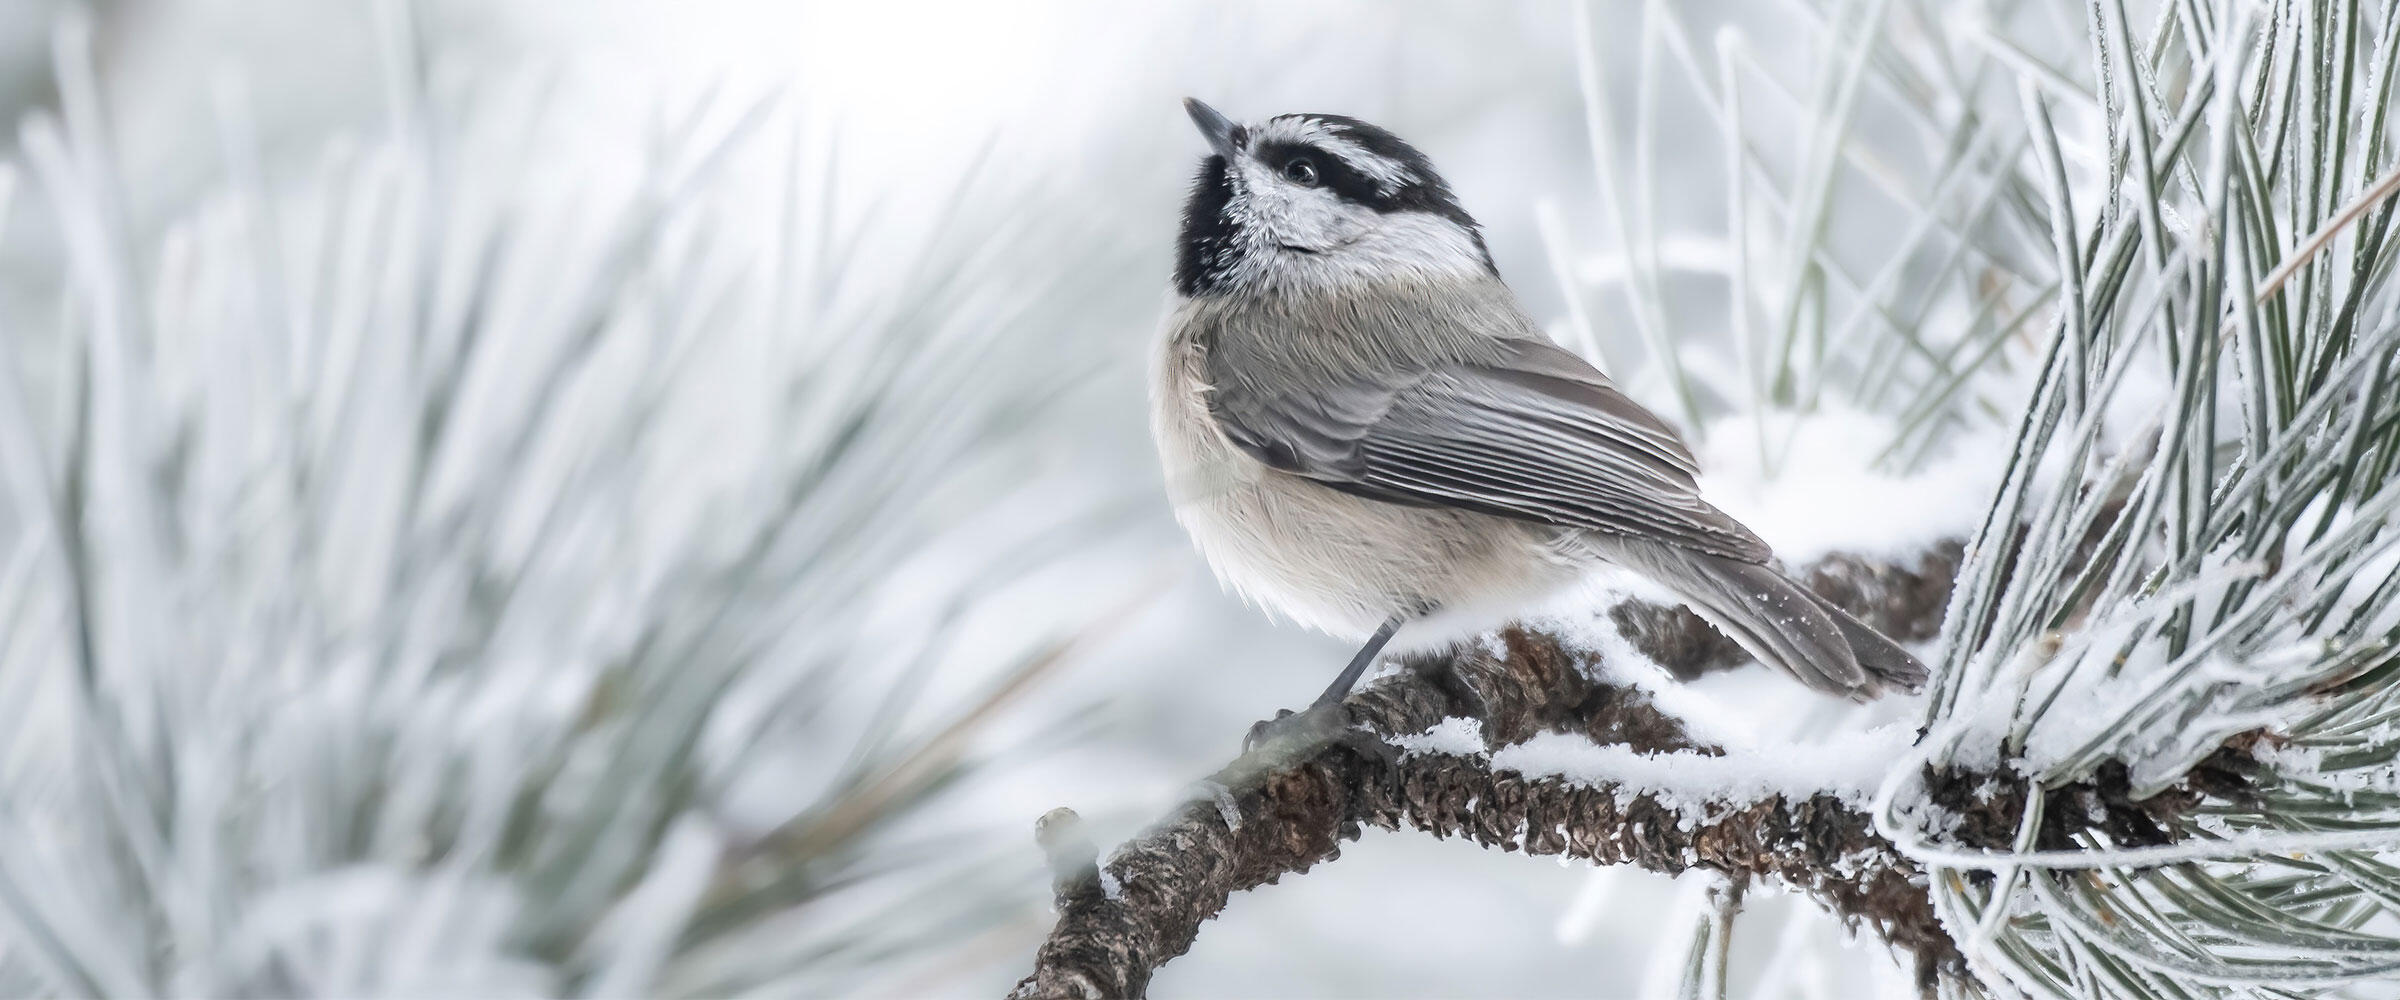 A Mountain Chickadee perches on a snowy evergreen branch.